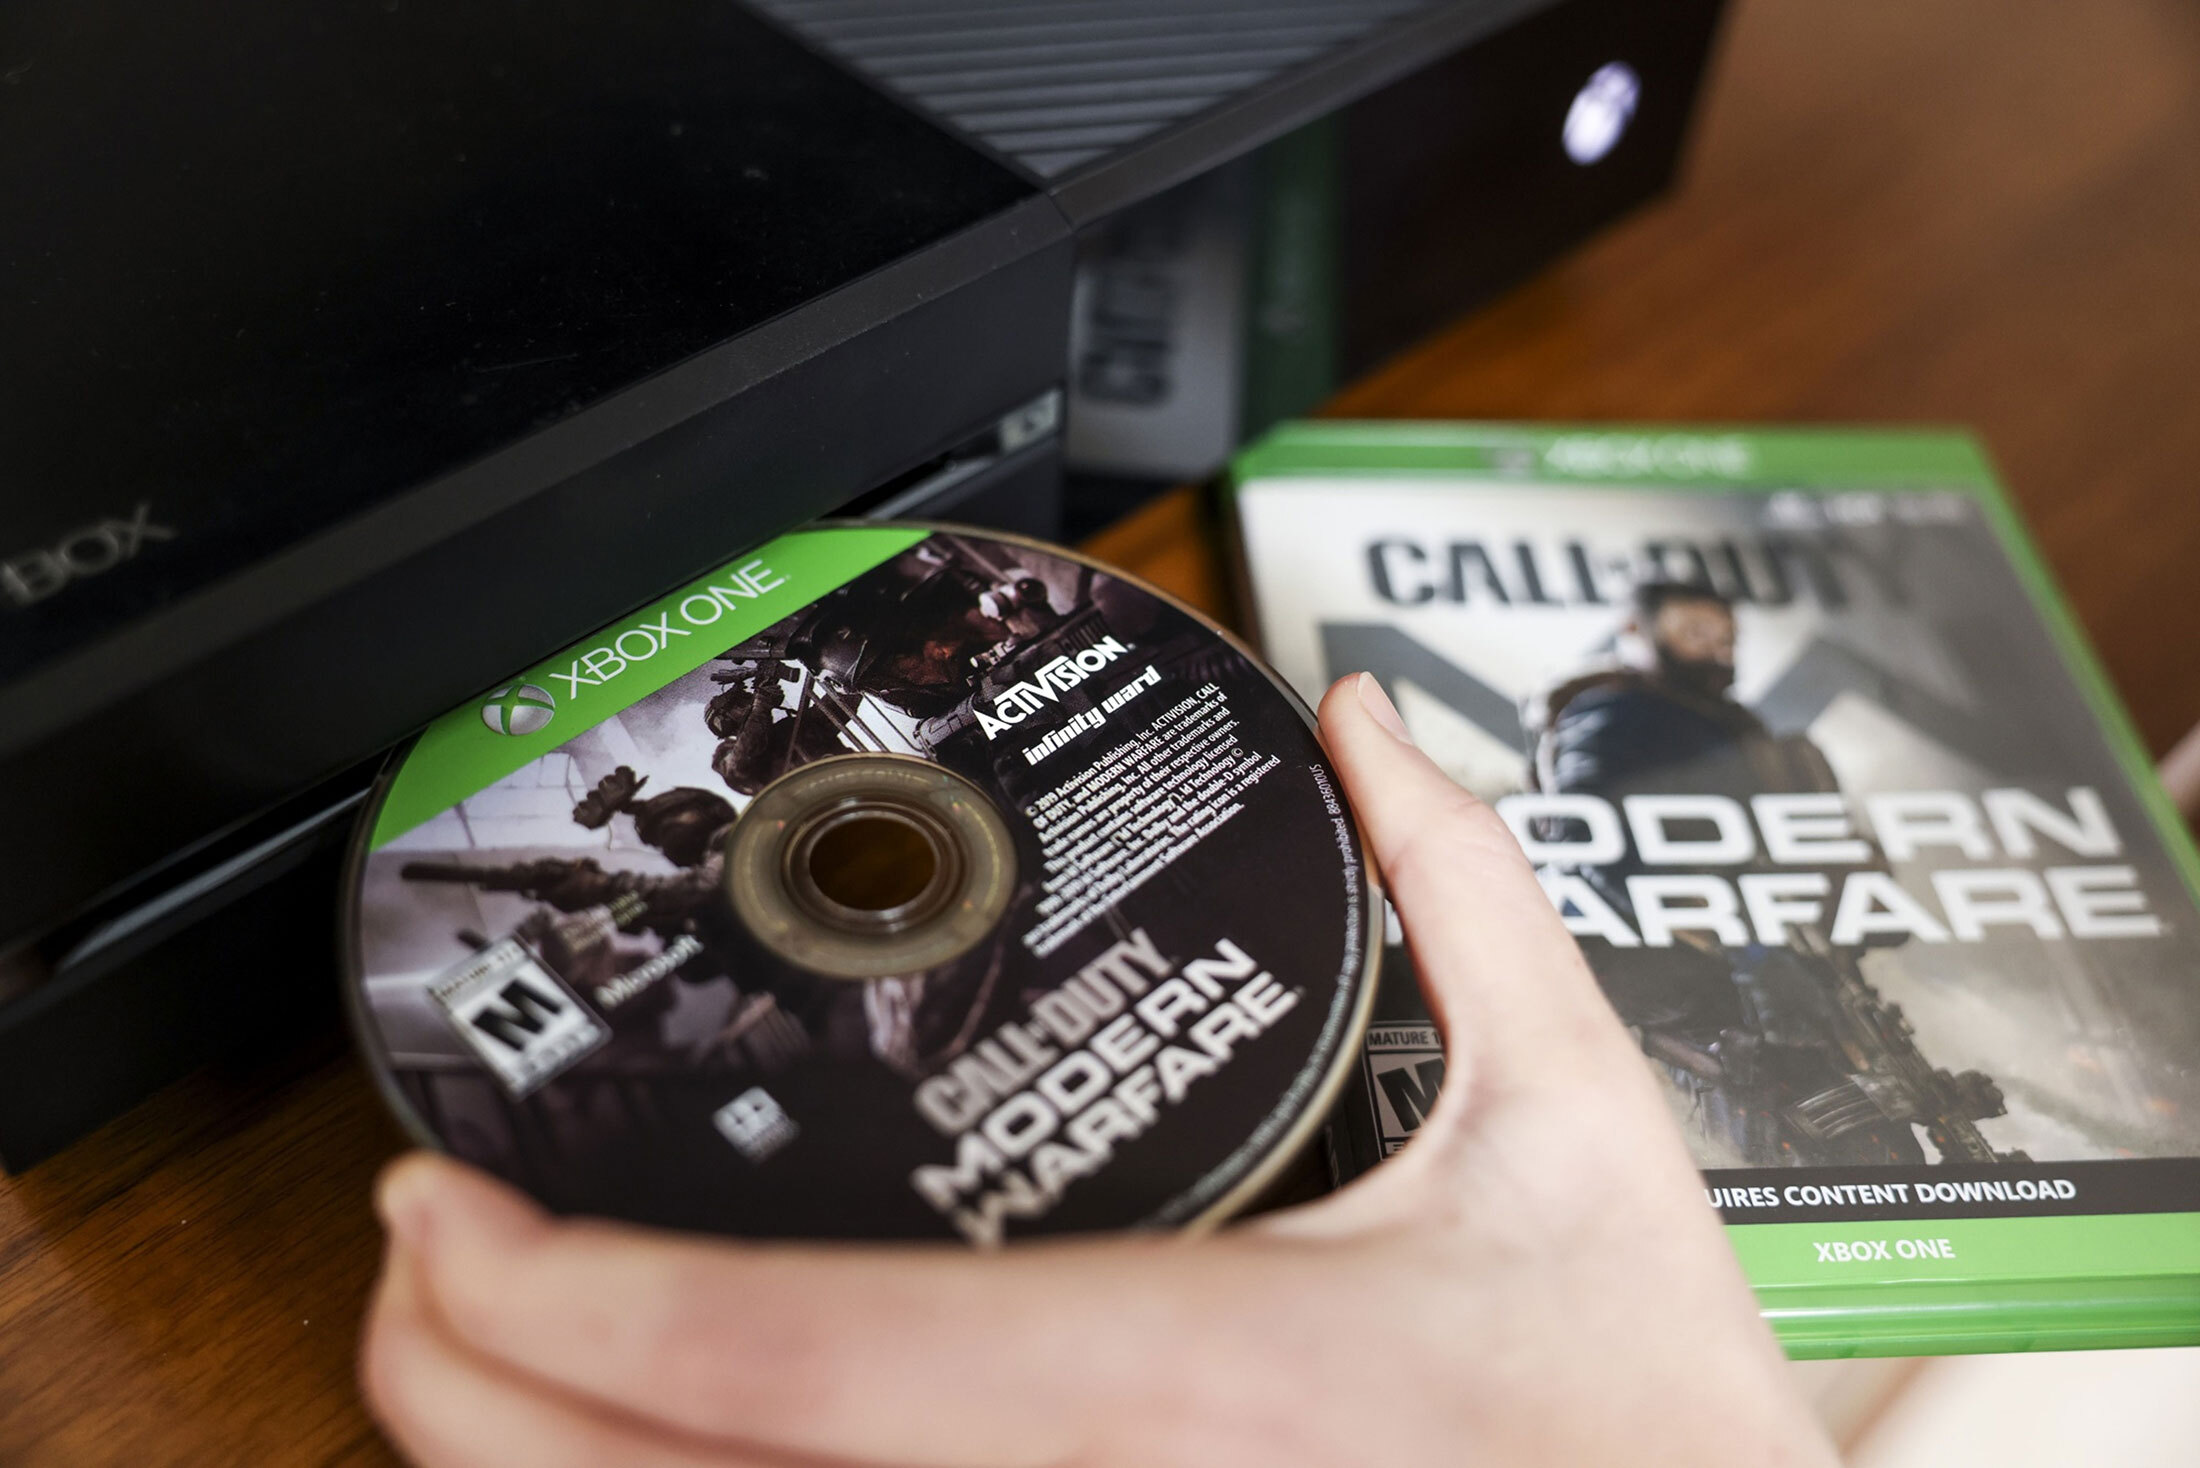 Regulatory report indicates Xbox Game Pass generated $2.9 billion on  consoles in 2021